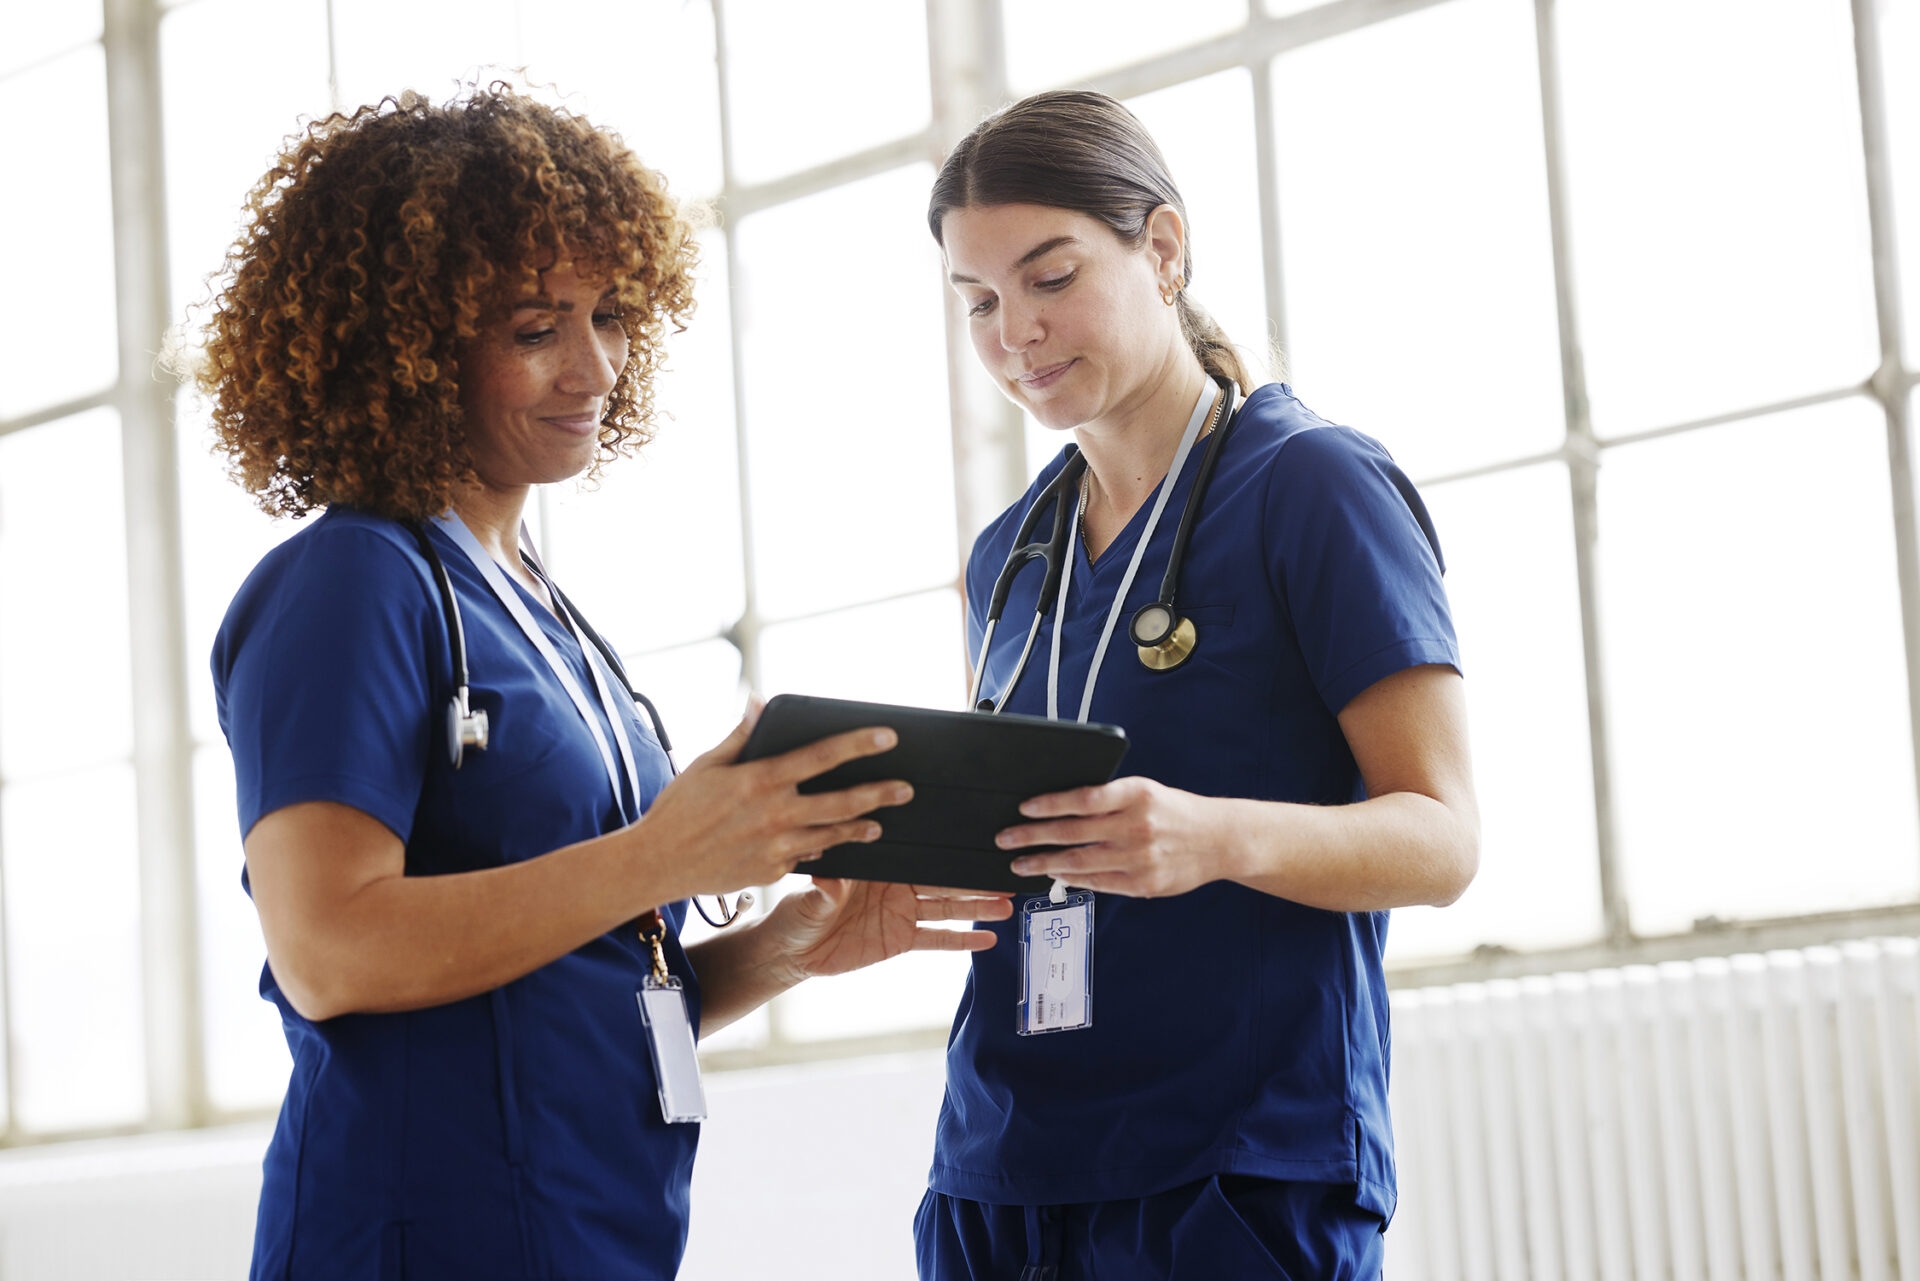 Two healthcare professionals in conversation, looking at digital tablet